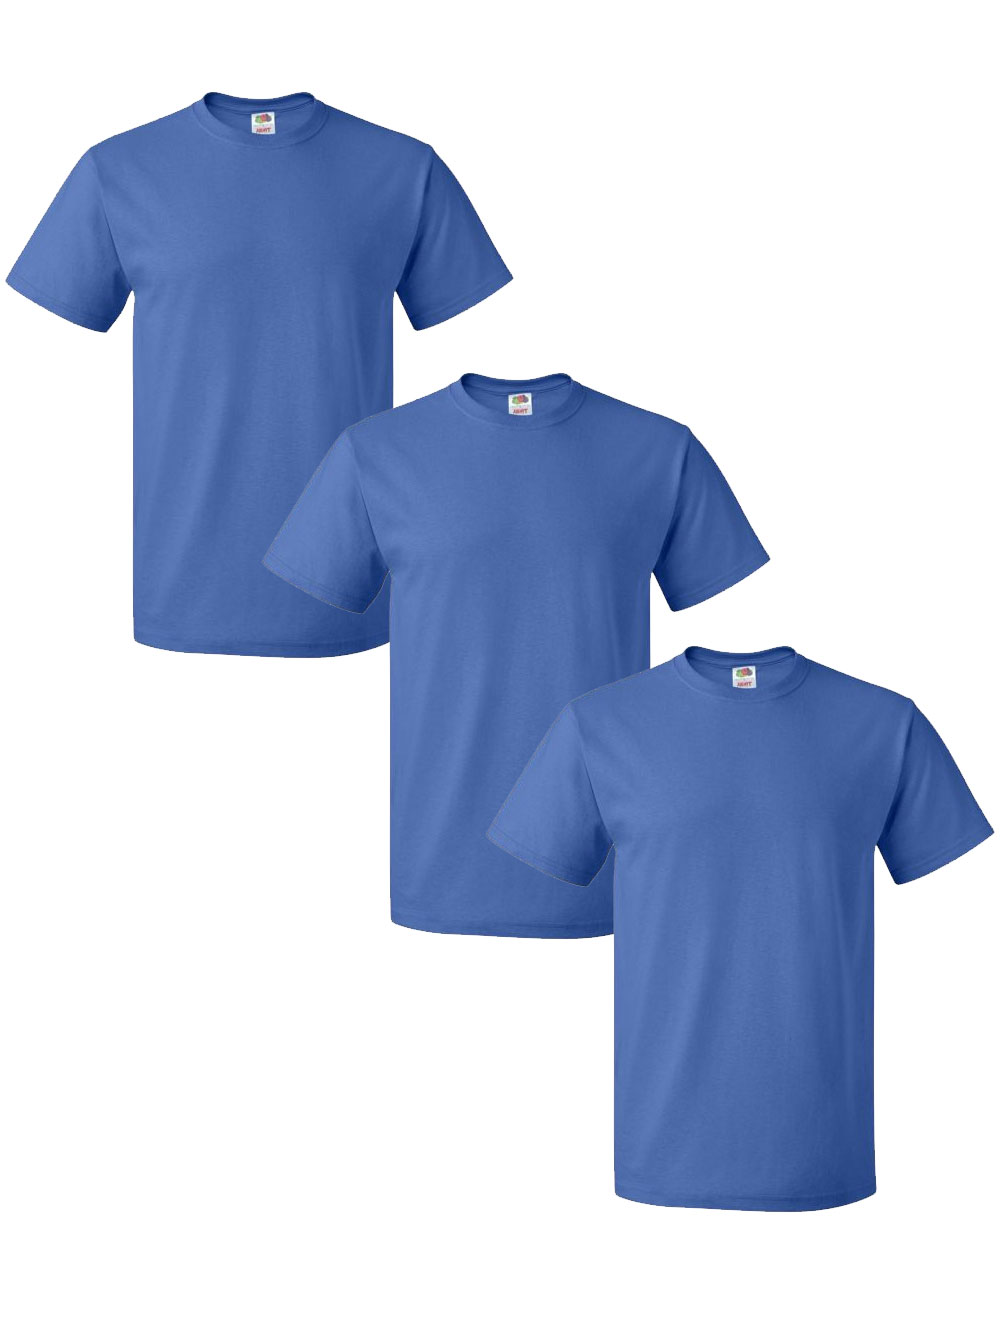 3 PACK - Fruit Of The Loom - Men's 100% Cotton T-Shirt (Royal Blue, 2XL) - image 1 of 1